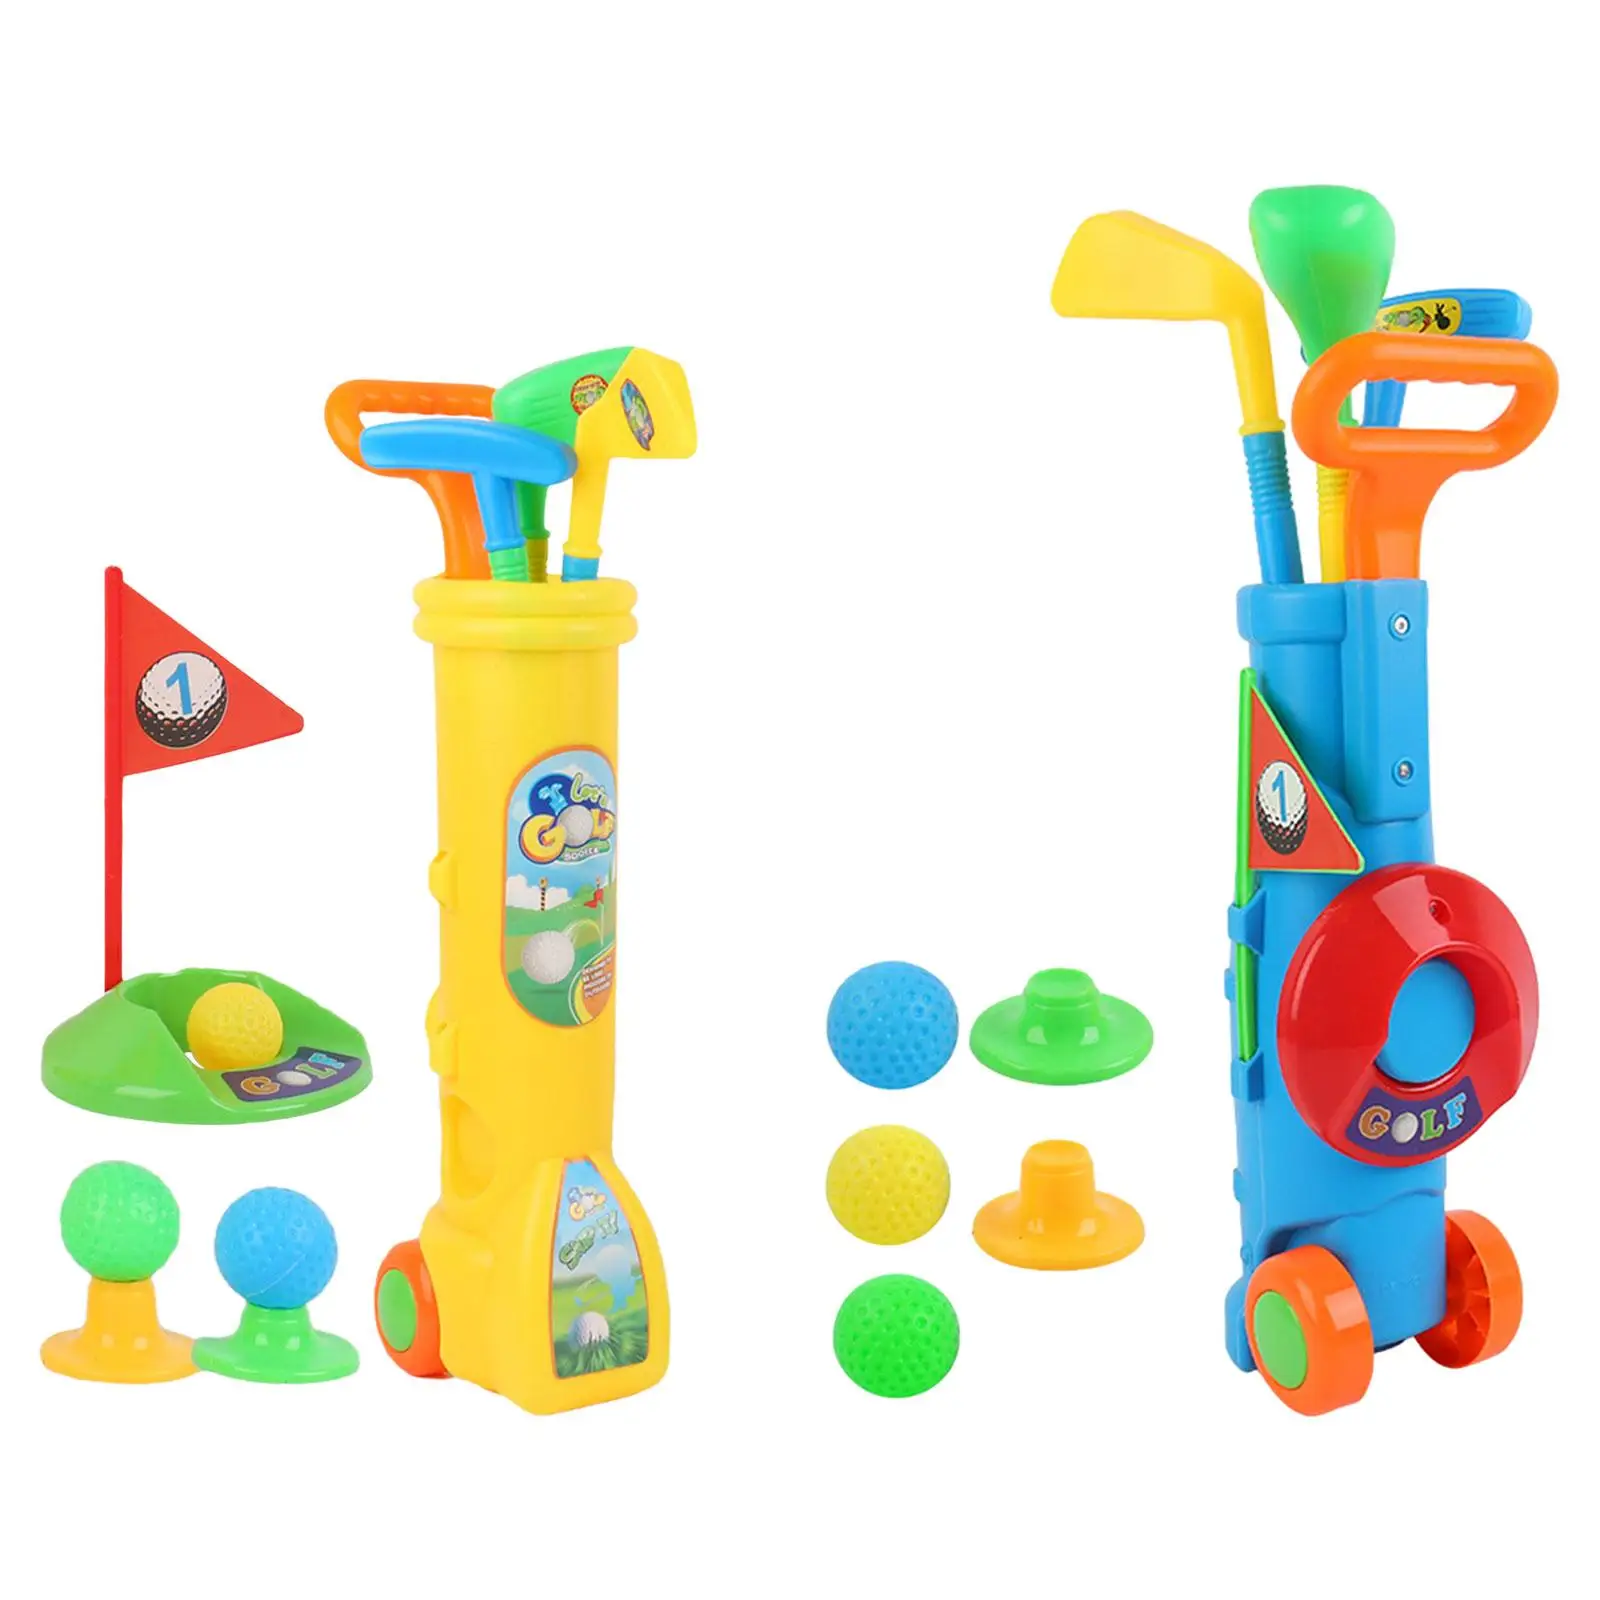 Kids Golf Club Set Toy Color Recognition Interactive Portable Outdoor Sports Toy Holiday Gift Babies Ages 3 4 5 6 Party Toy Kids